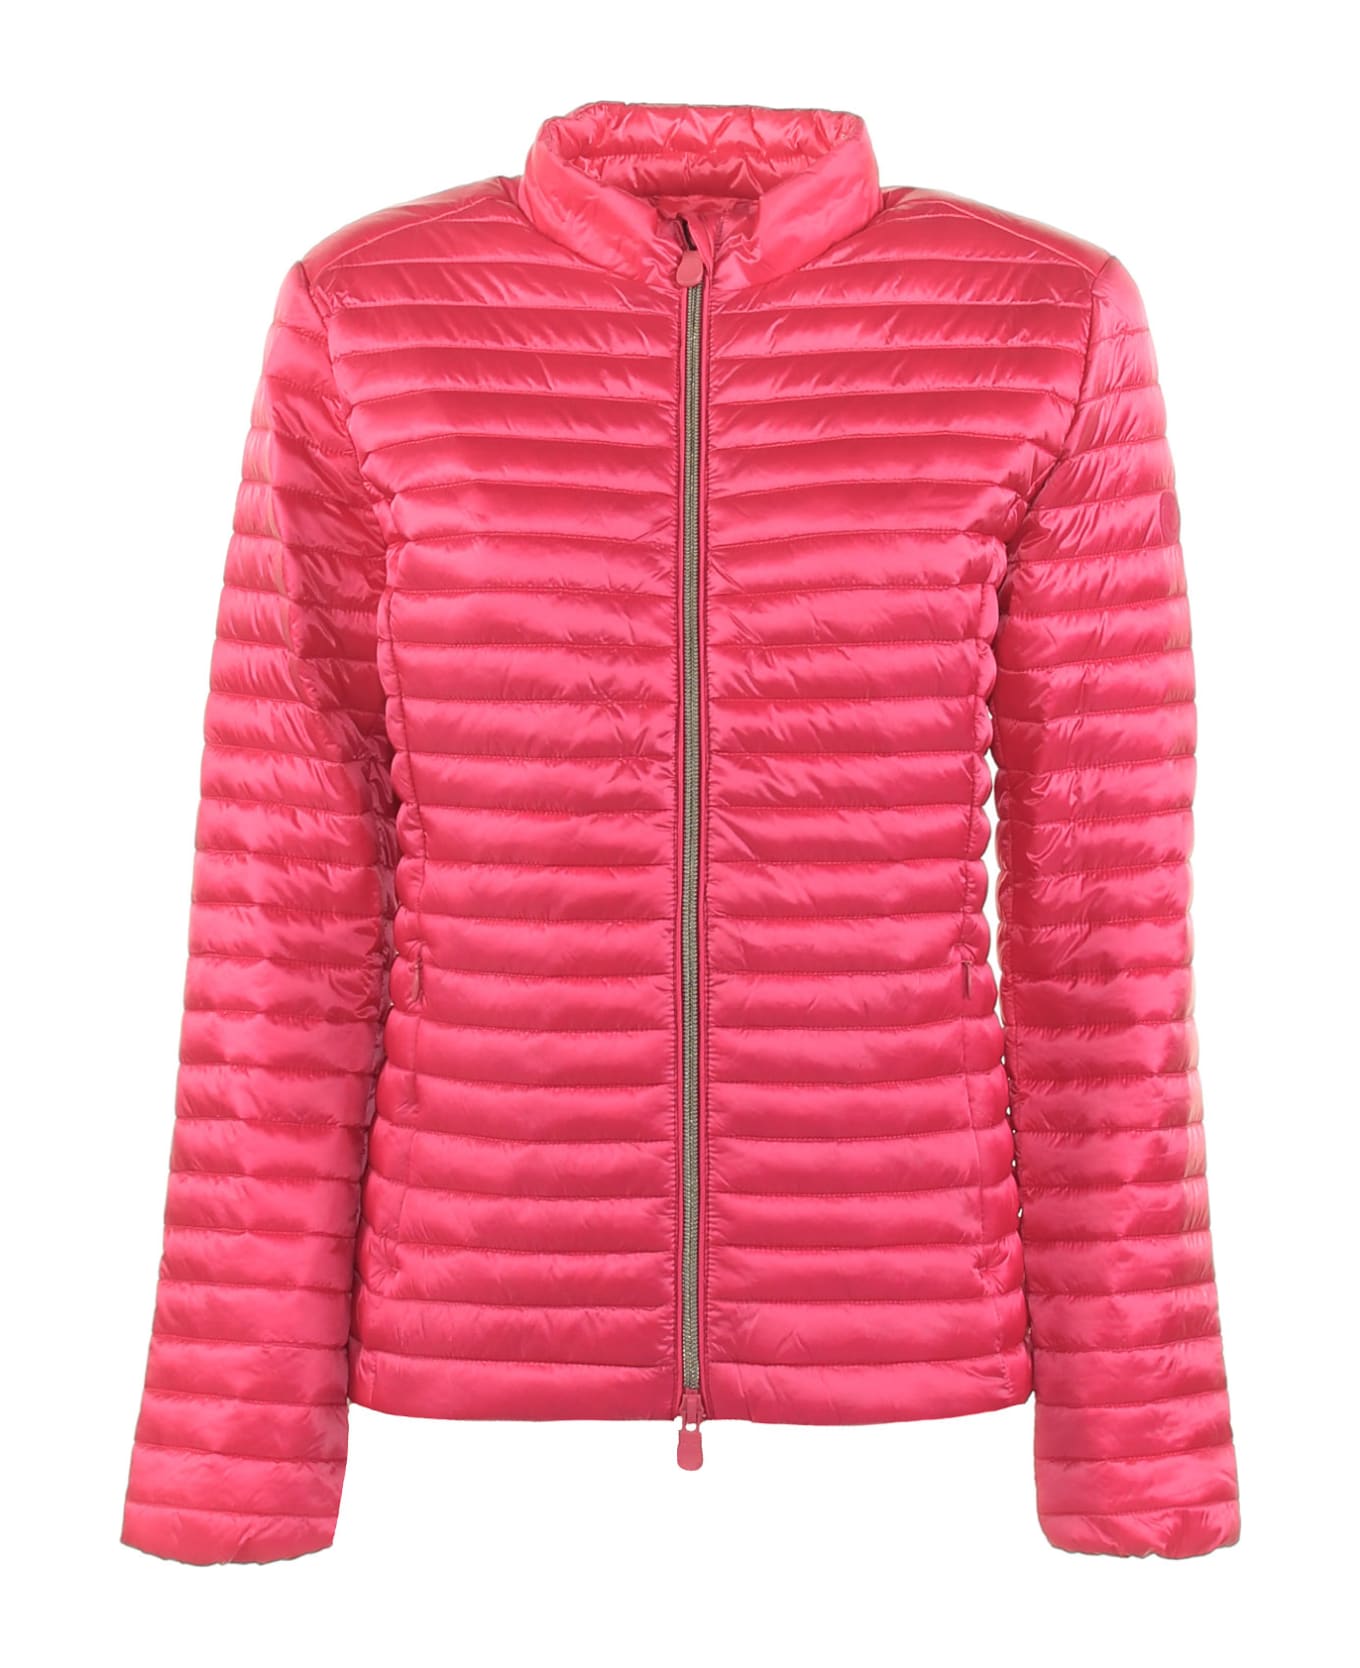 Save the Duck Pearly Pink Quilted Jacket - PINK